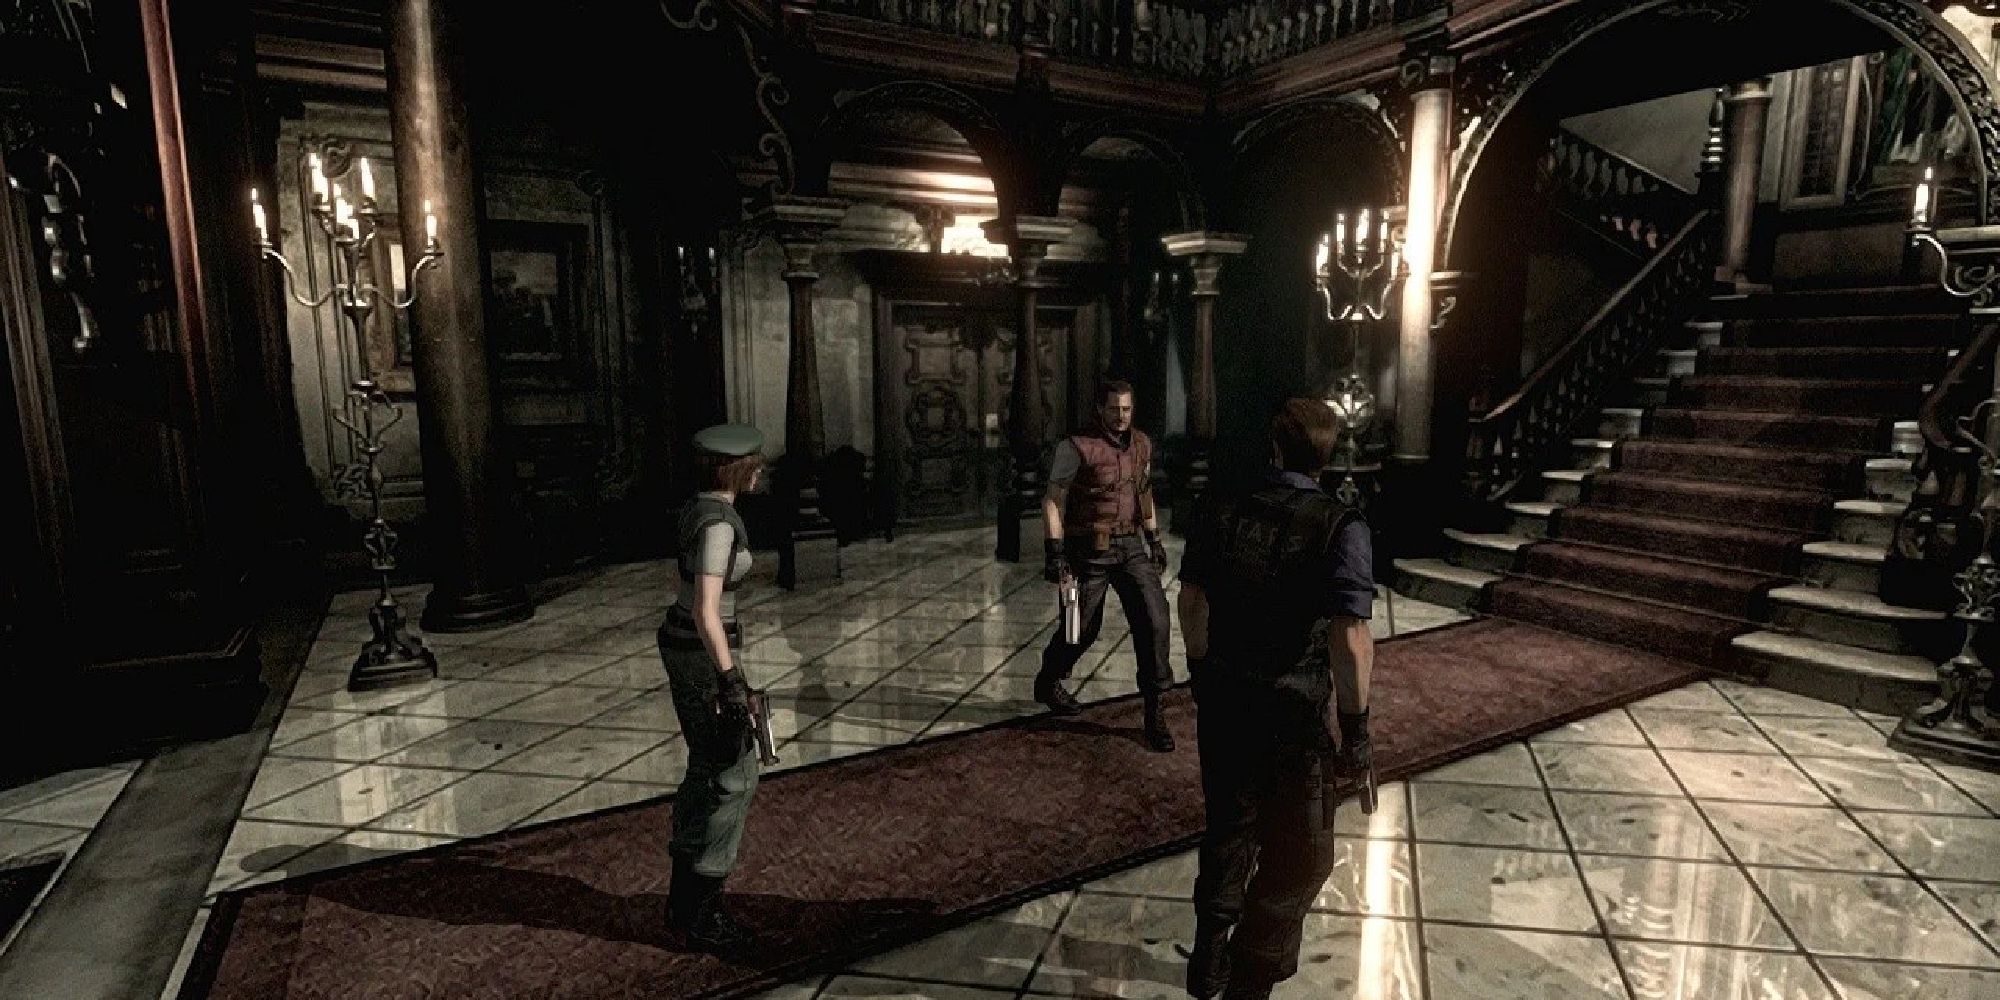 The RESIDENT EVIL Games Just Crossed A Major Milestone